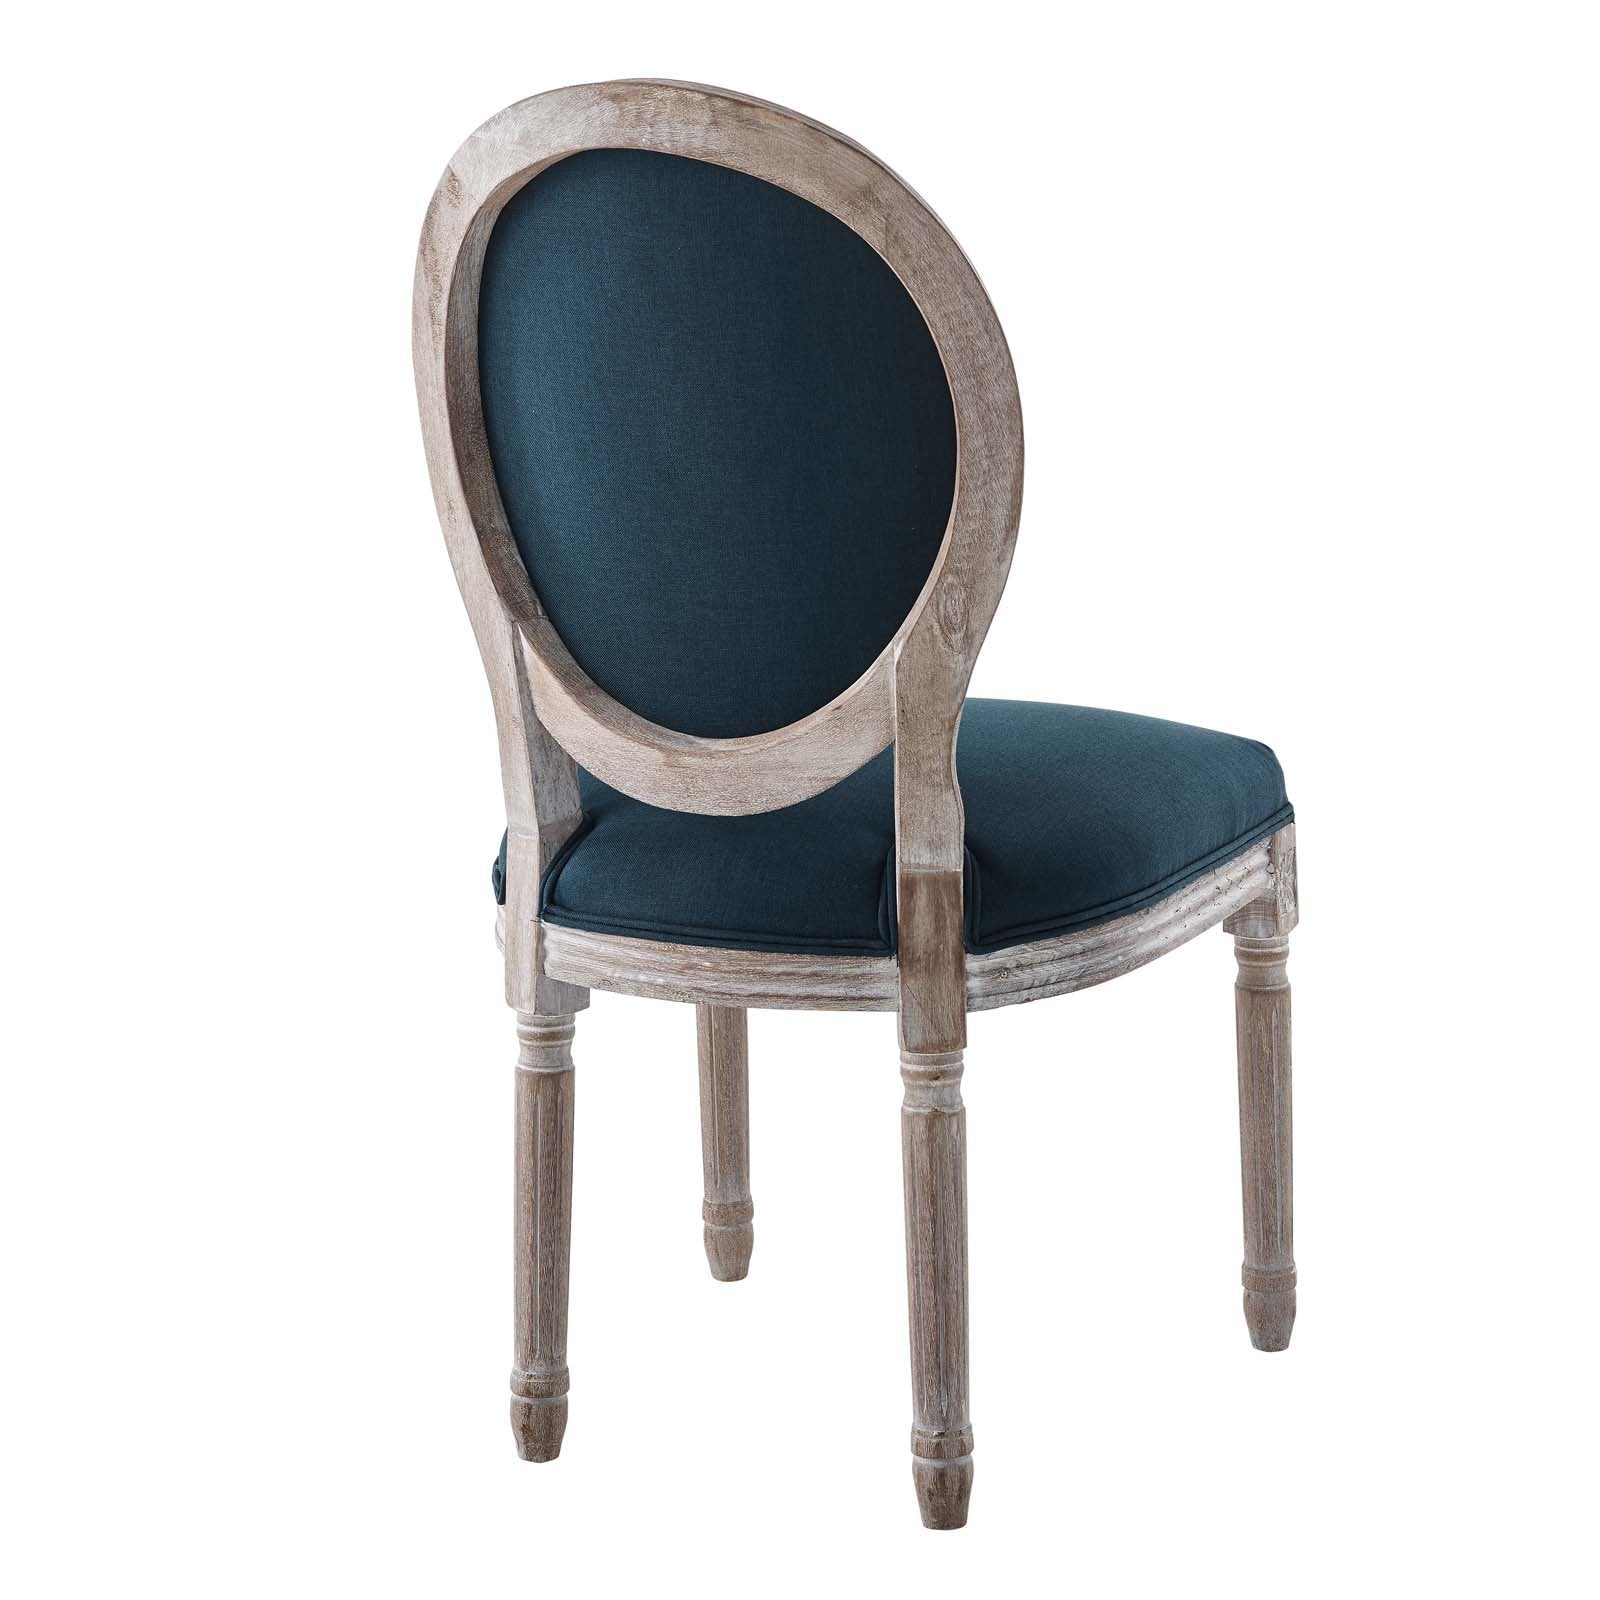 Emanate Vintage French Upholstered Fabric Dining Side Chair - East Shore Modern Home Furnishings